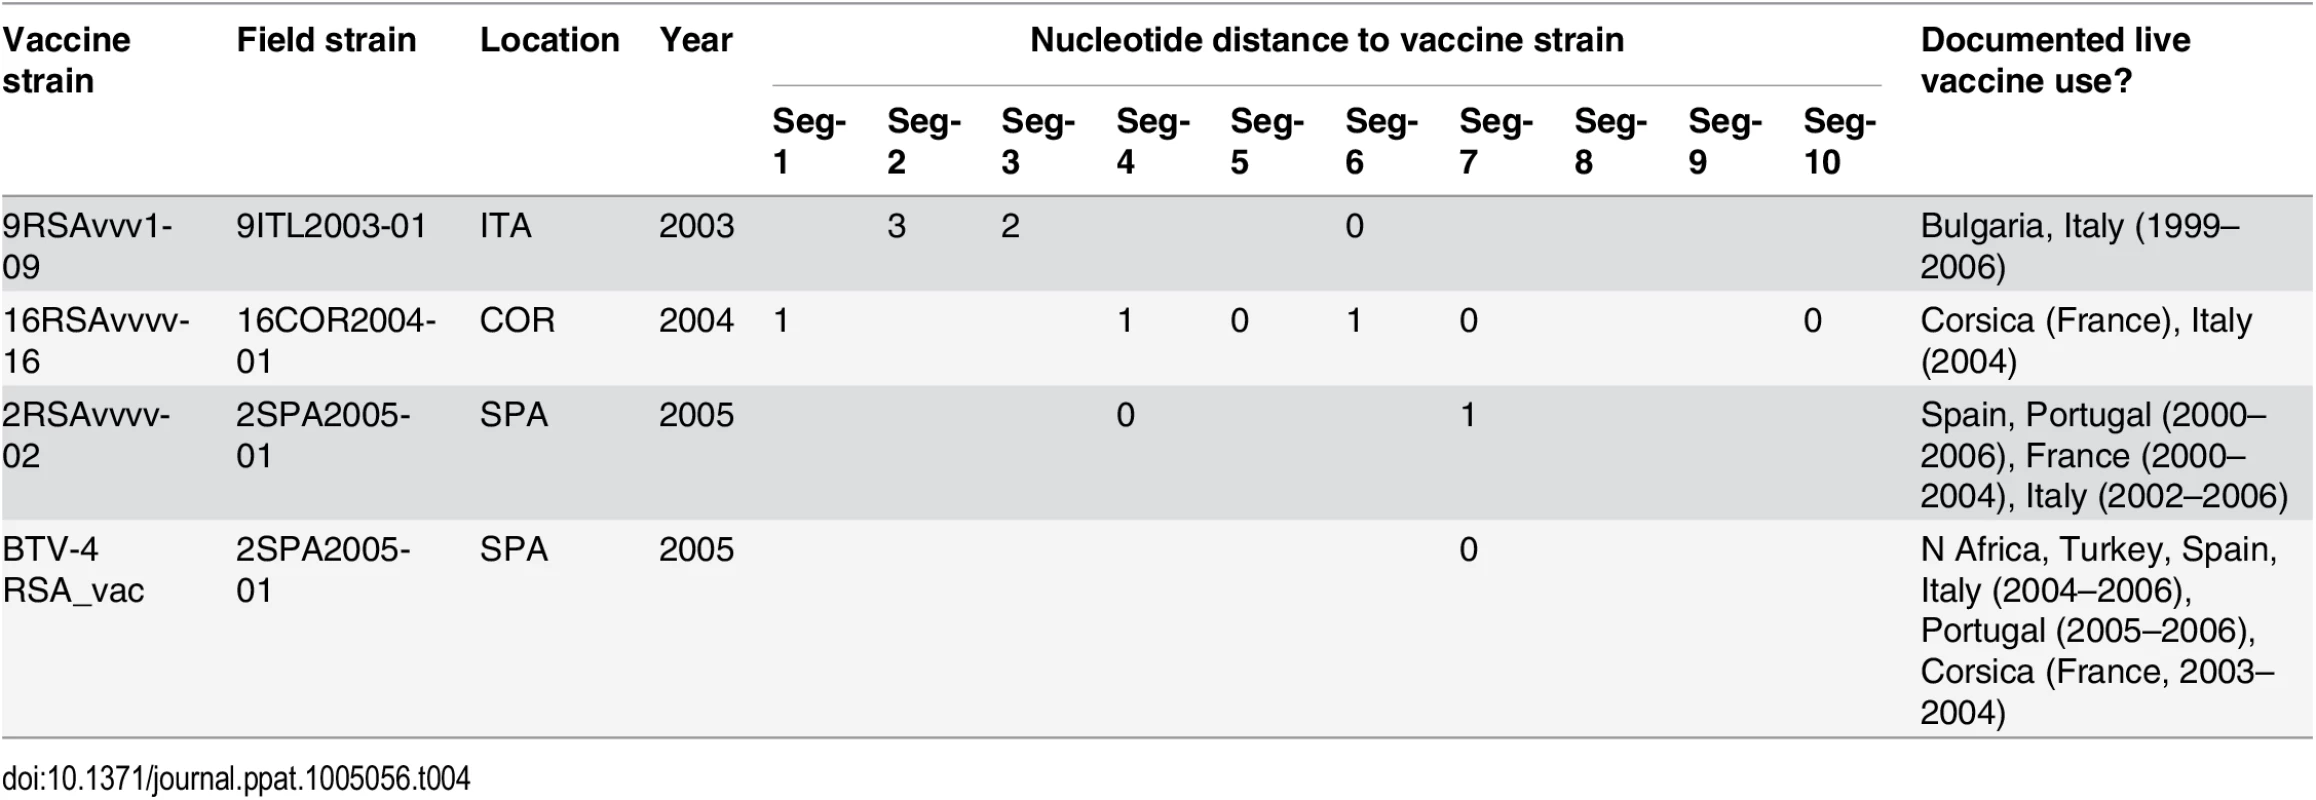 Evidence for BTV reassortment events involving modified live vaccines in Europe.